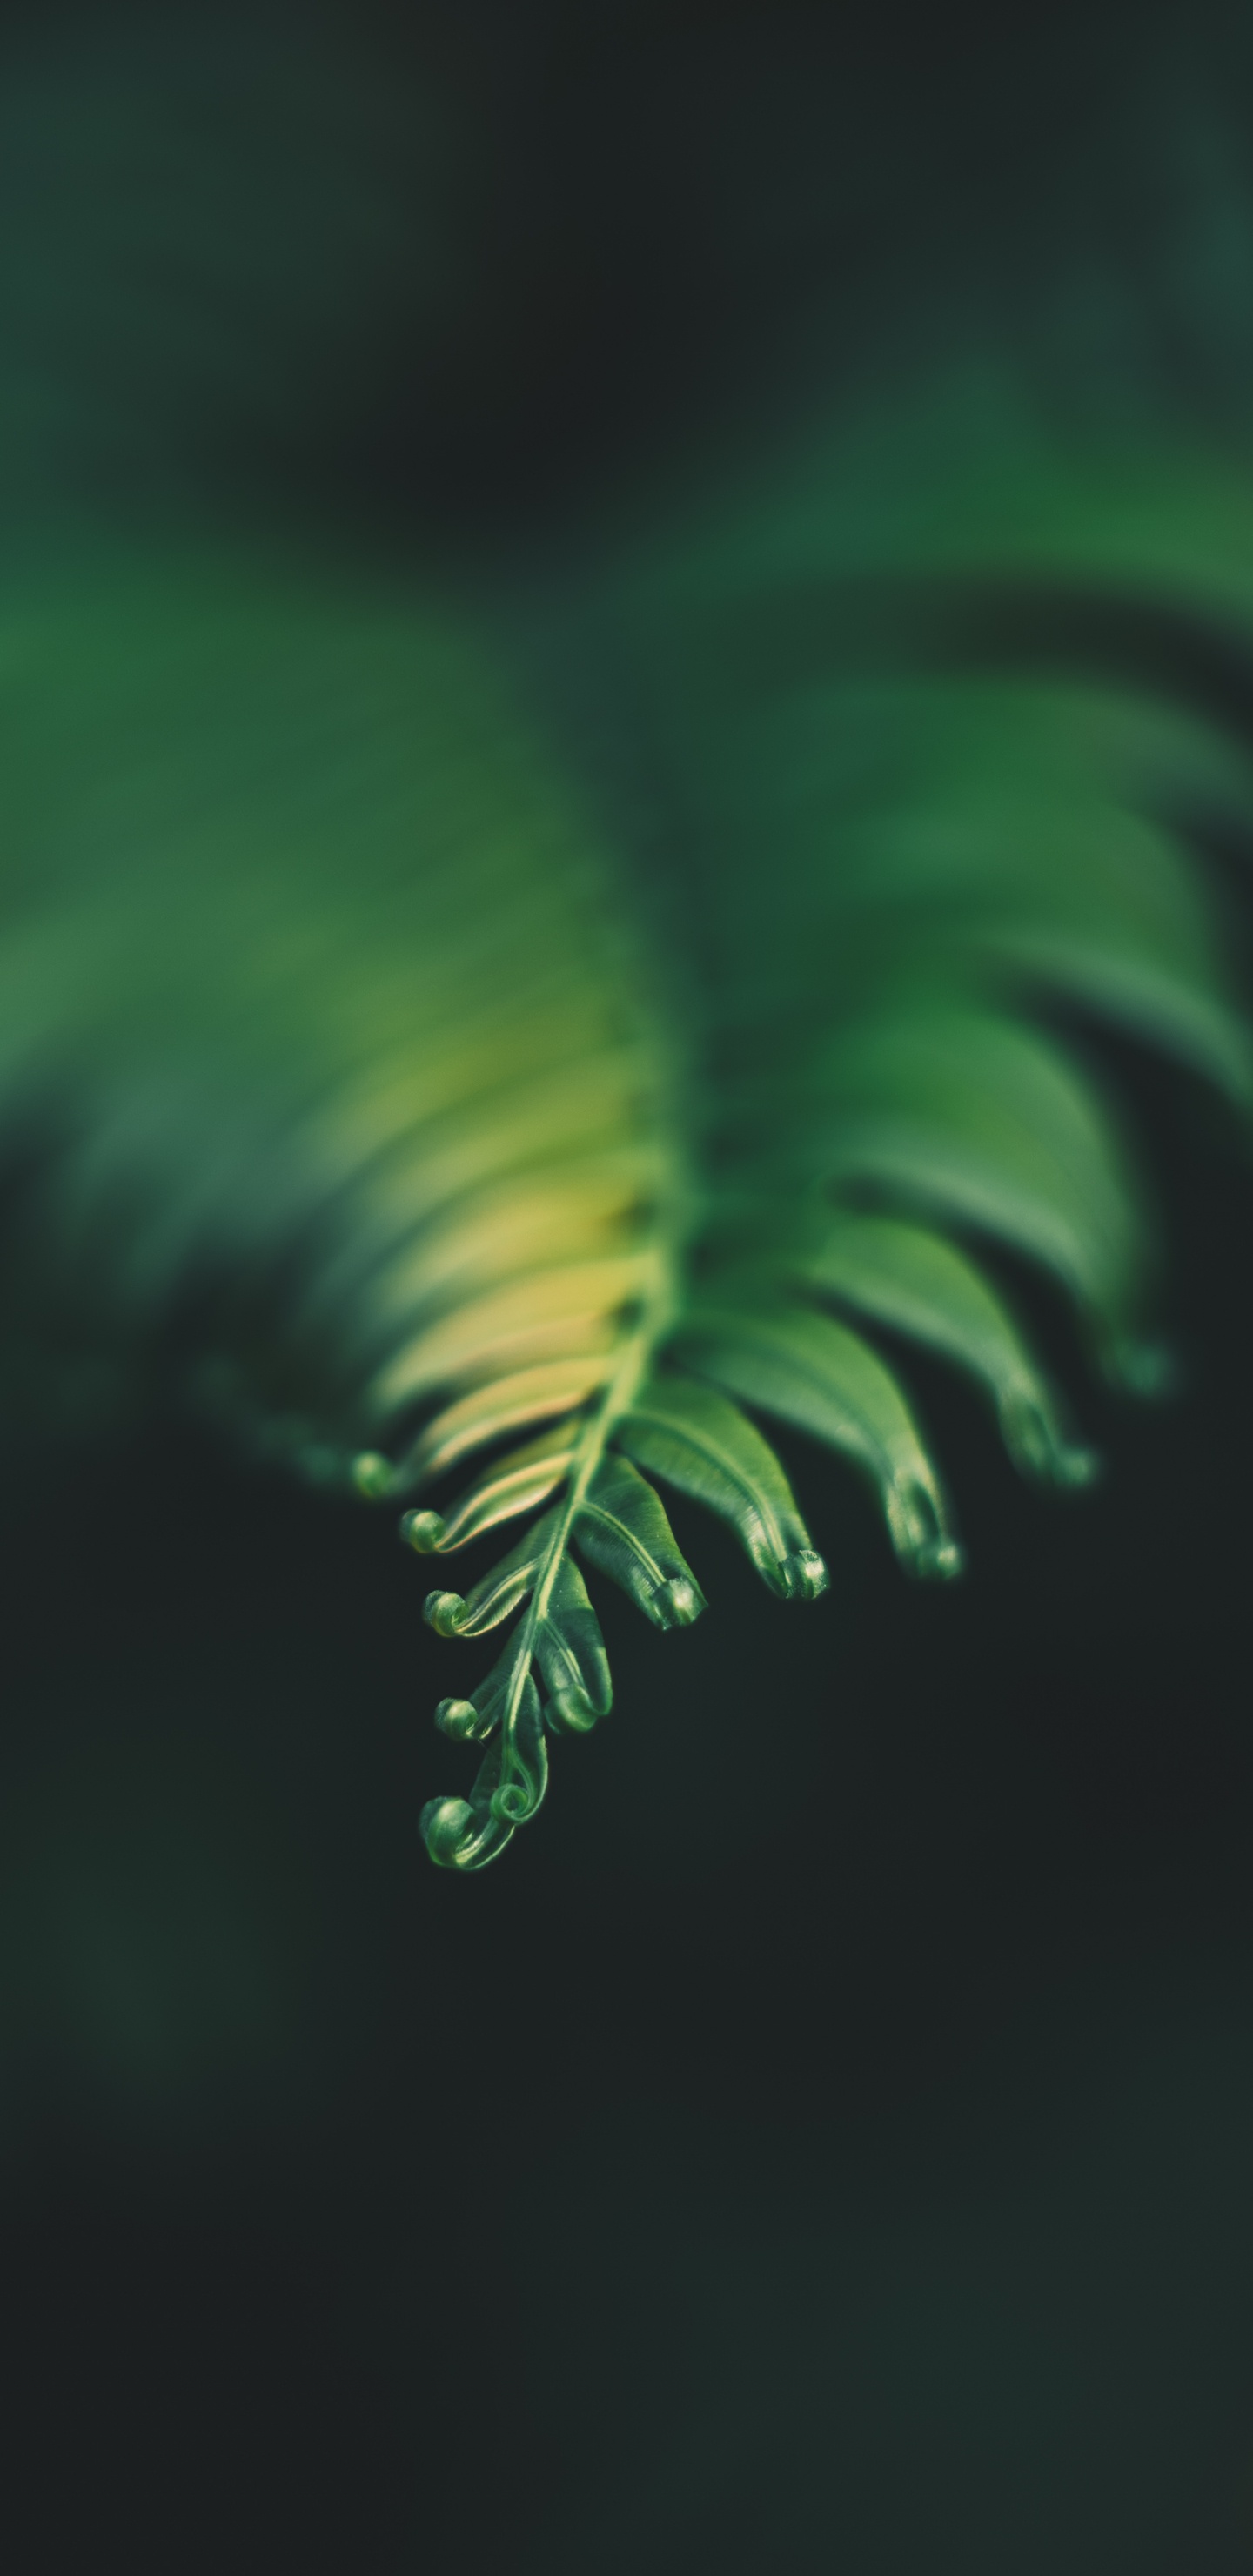 Plante, Feuille, Fougère, Green, Nature. Wallpaper in 1440x2960 Resolution